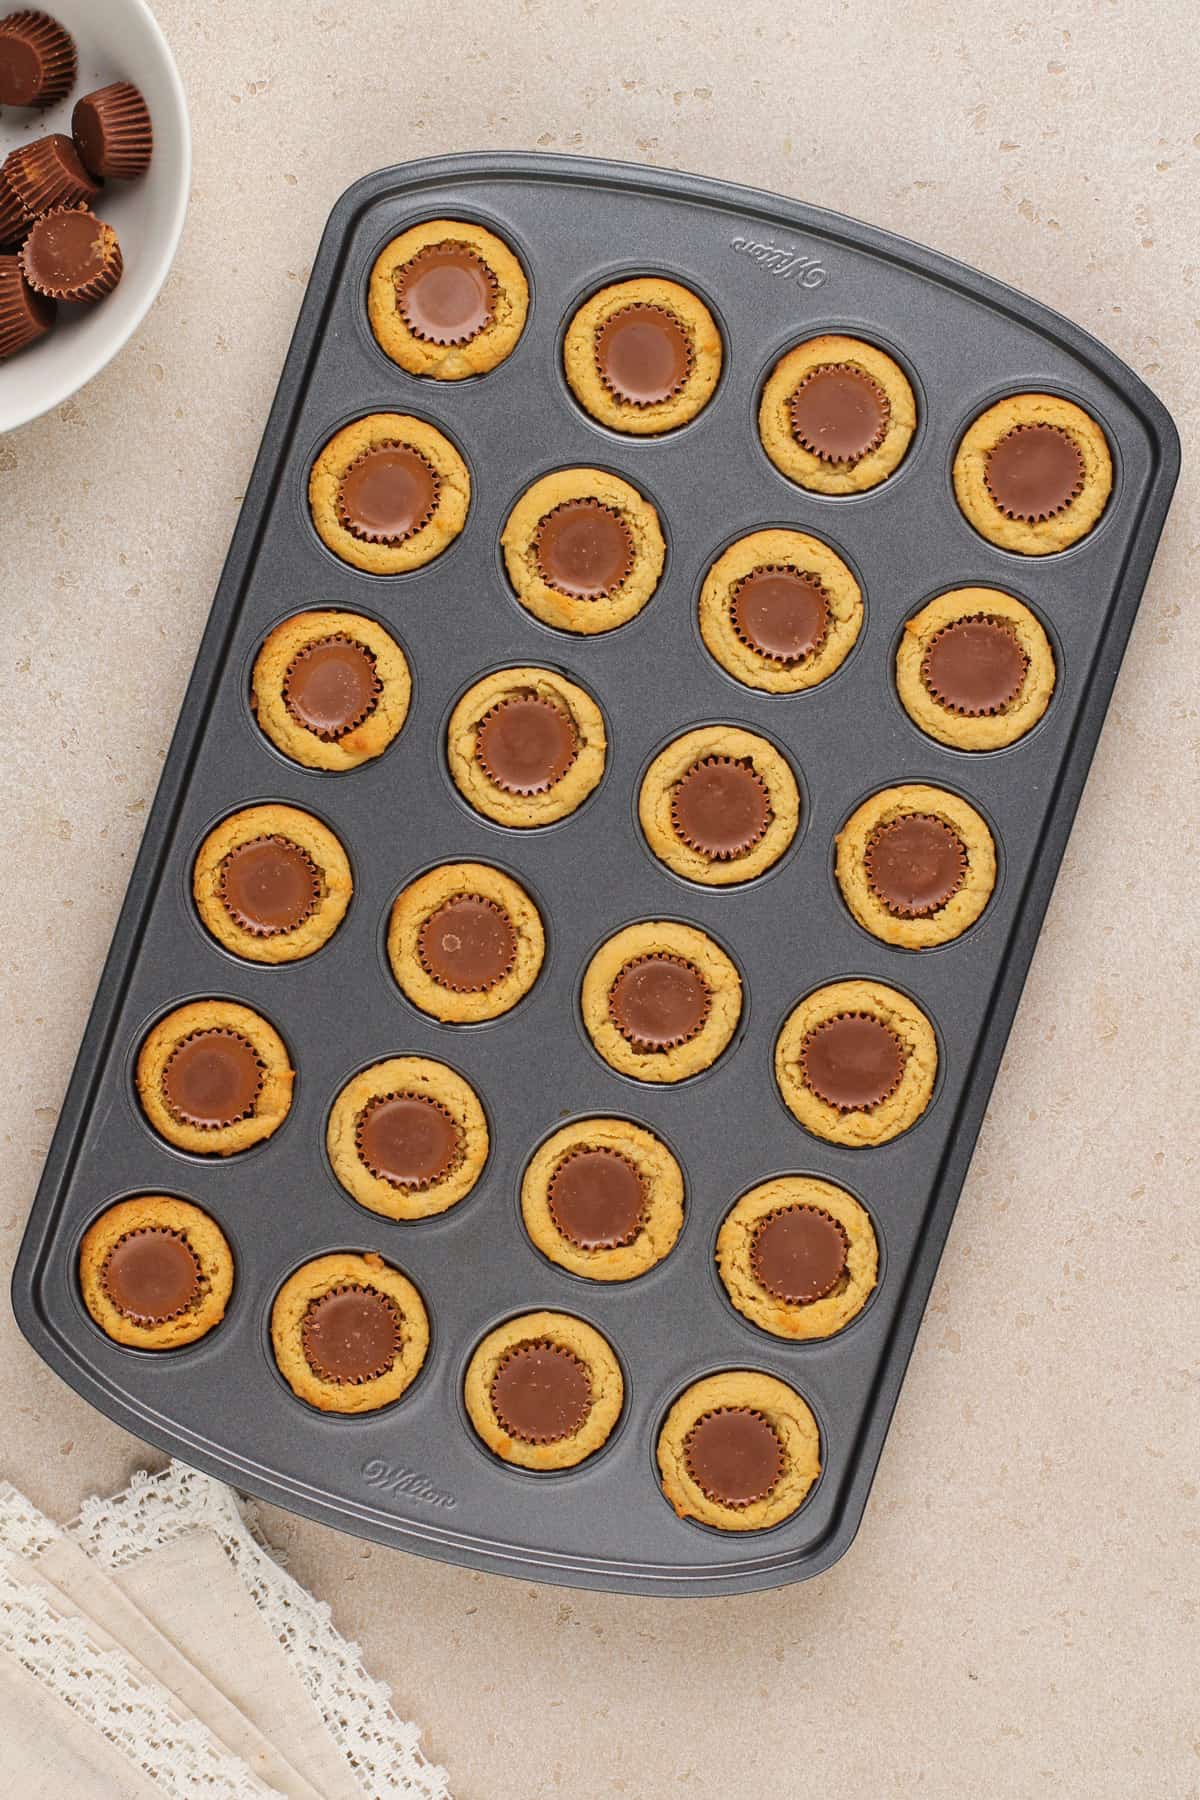 Peanut butter cups pressed into baked peanut butter cookies in a mini muffin tin.